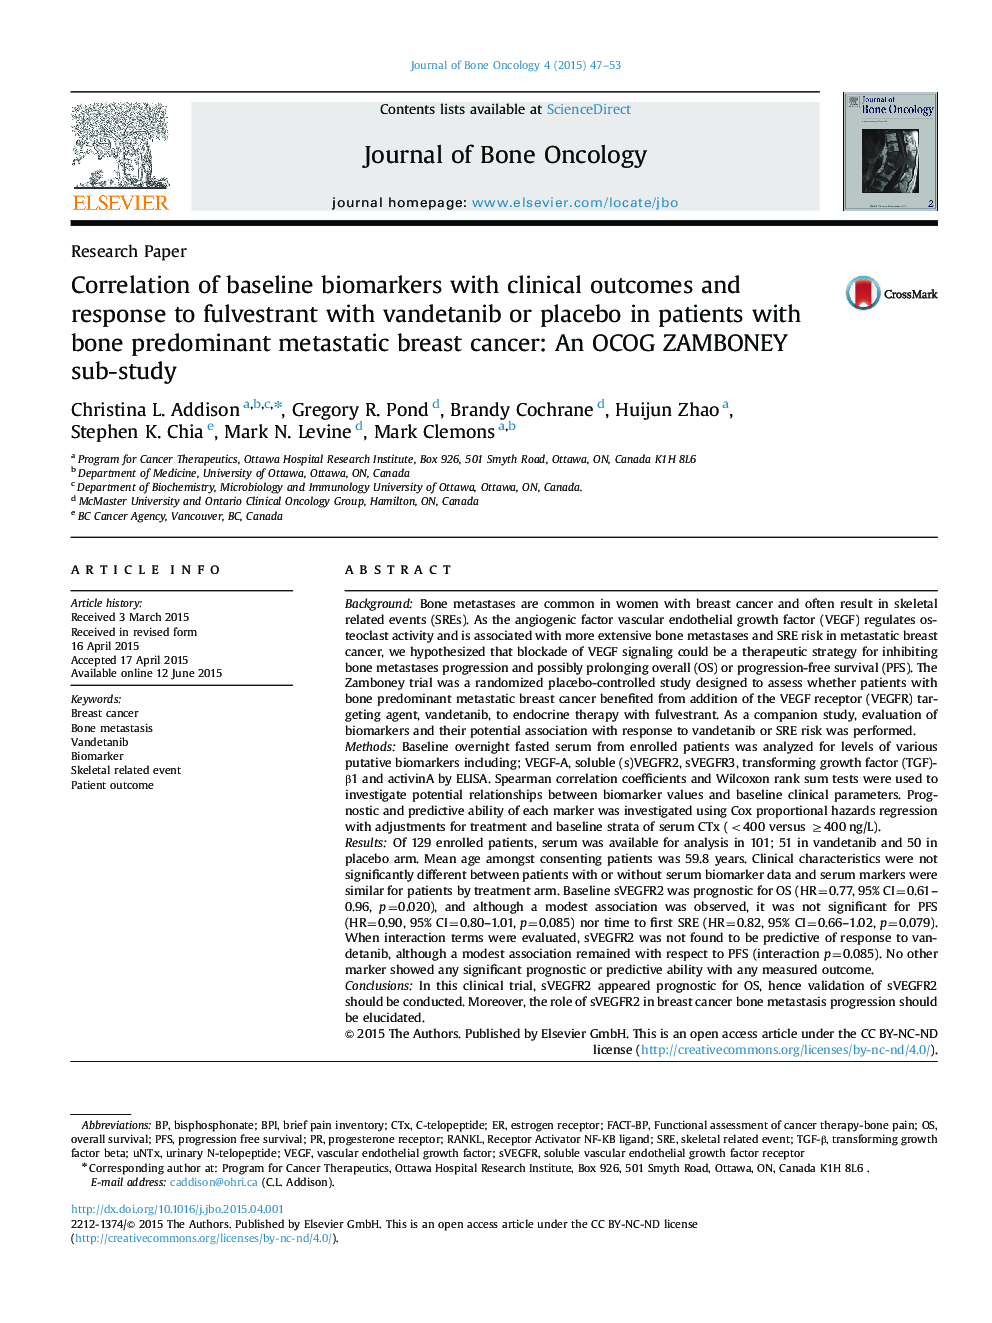 Correlation of baseline biomarkers with clinical outcomes and response to fulvestrant with vandetanib or placebo in patients with bone predominant metastatic breast cancer: An OCOG ZAMBONEY sub-study